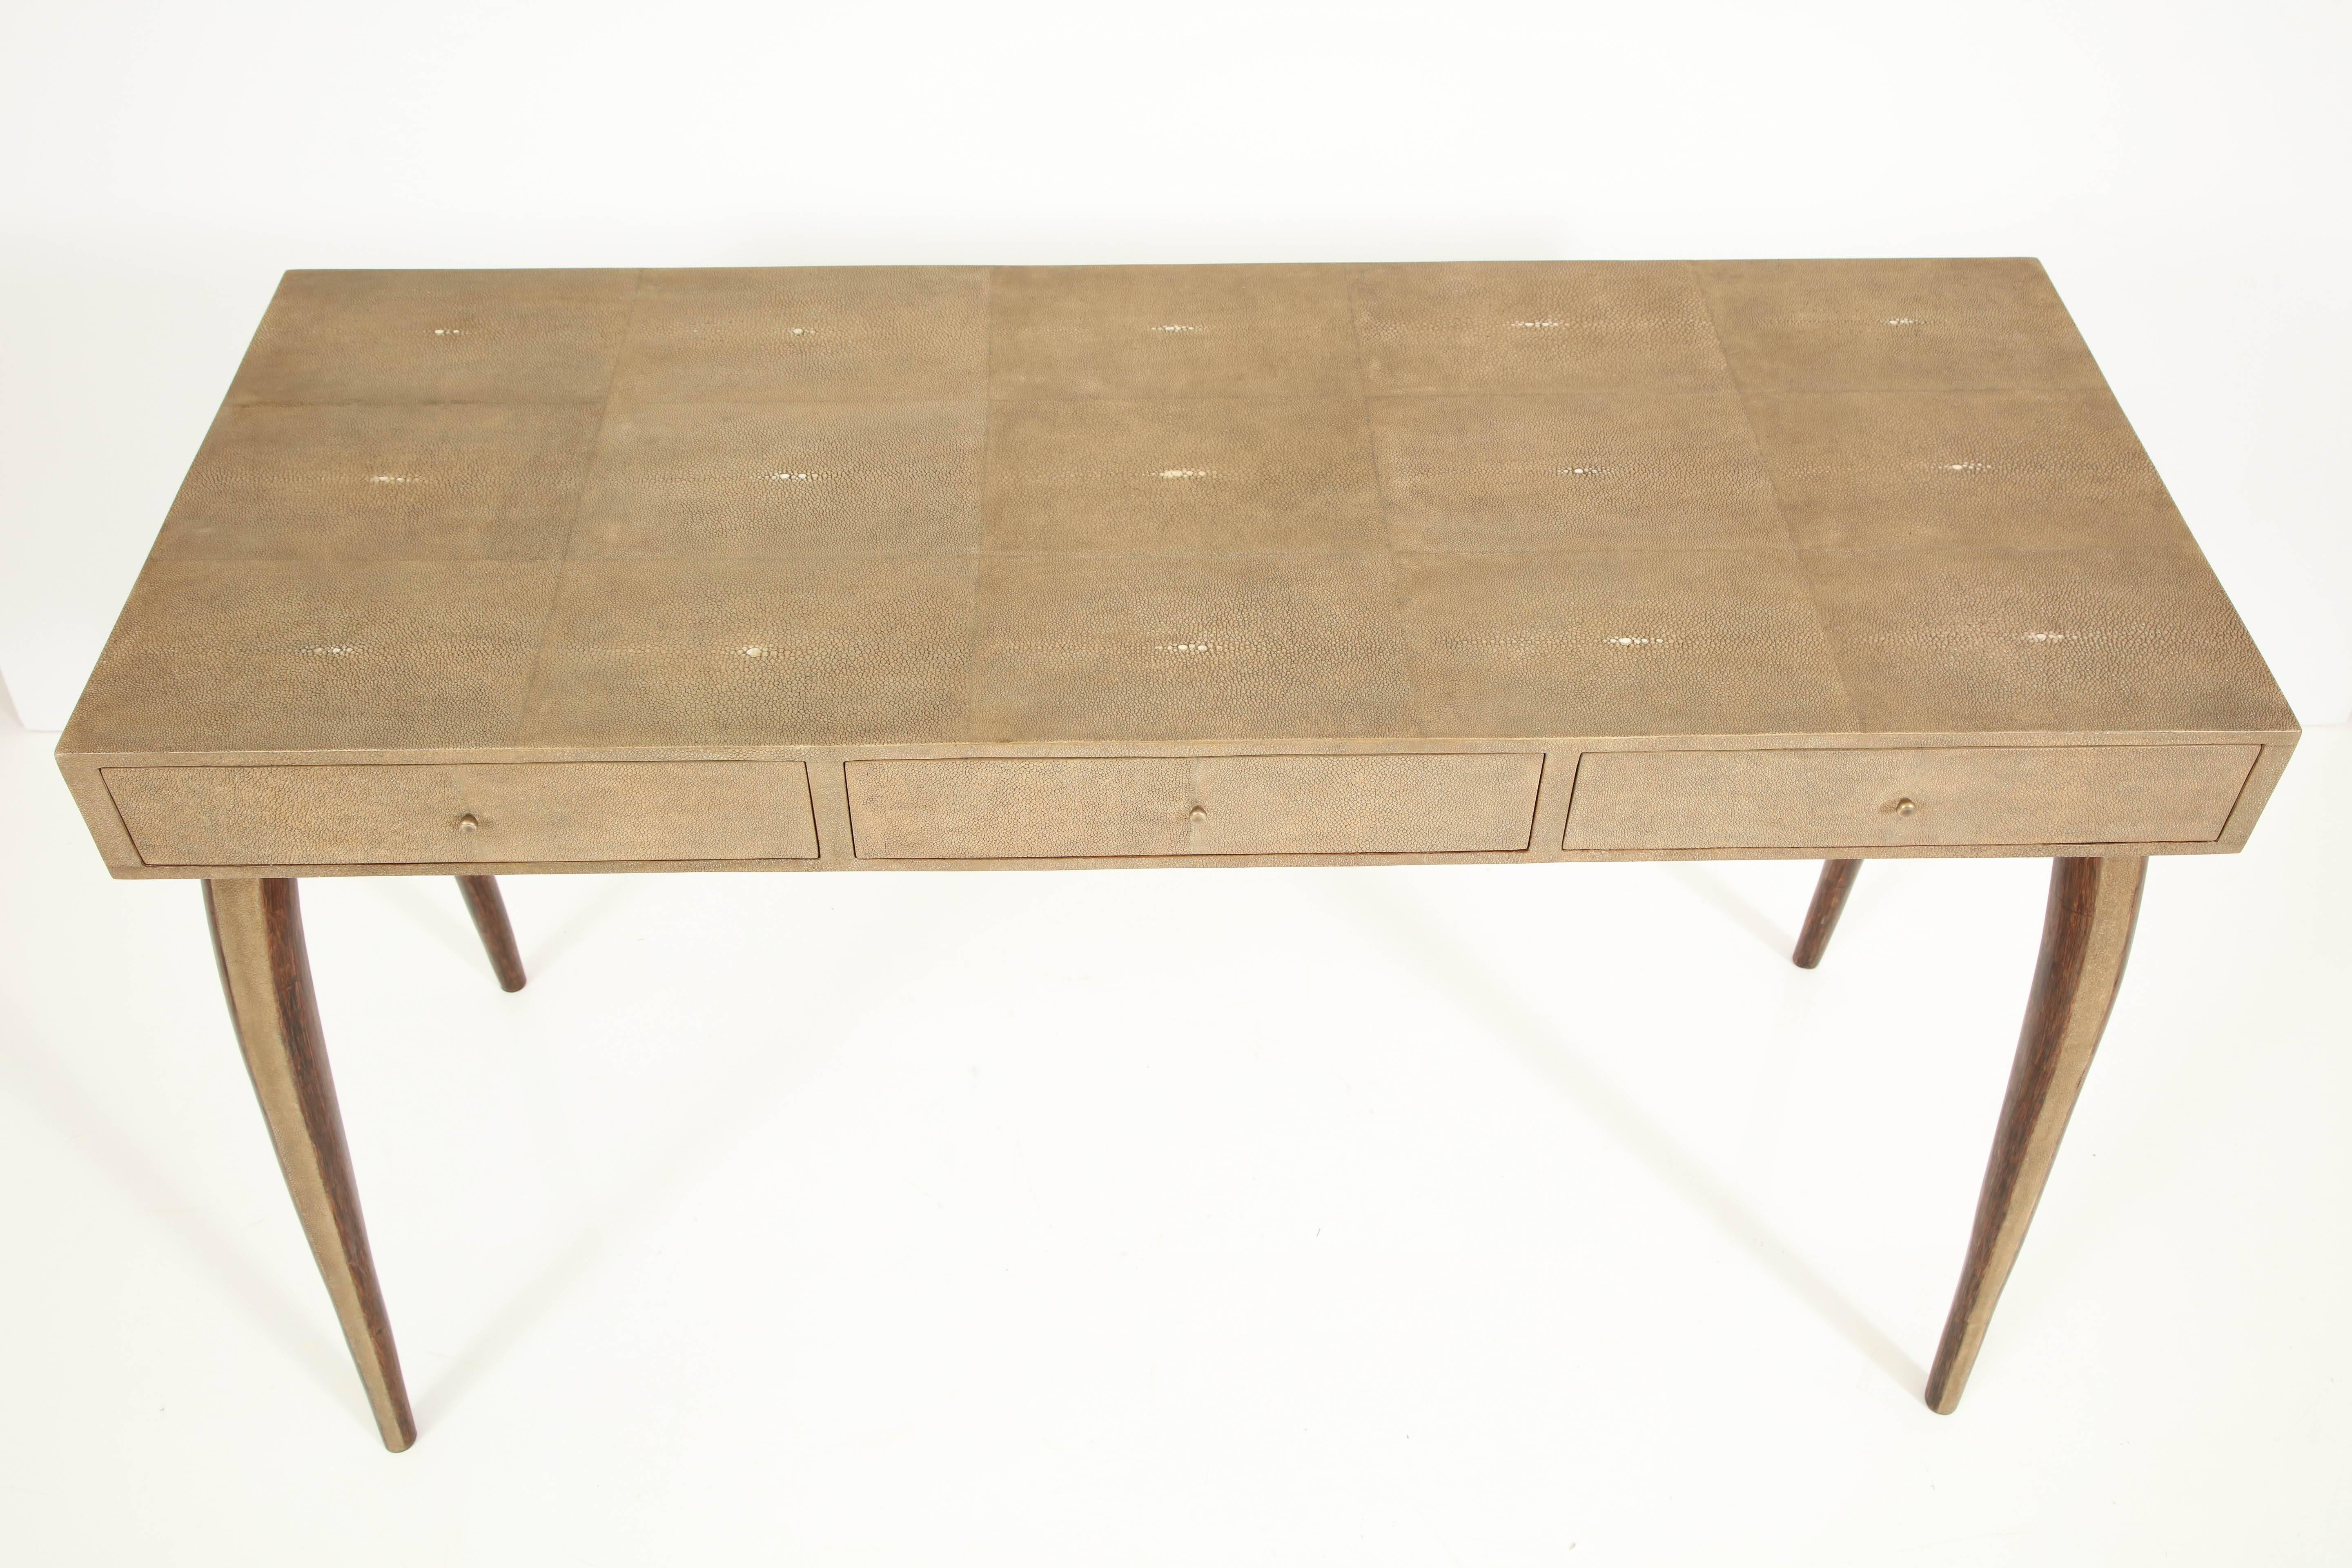 Desk, Shagreen with Brass and Palm Wood Details, Contemporary, Khaki Color 2